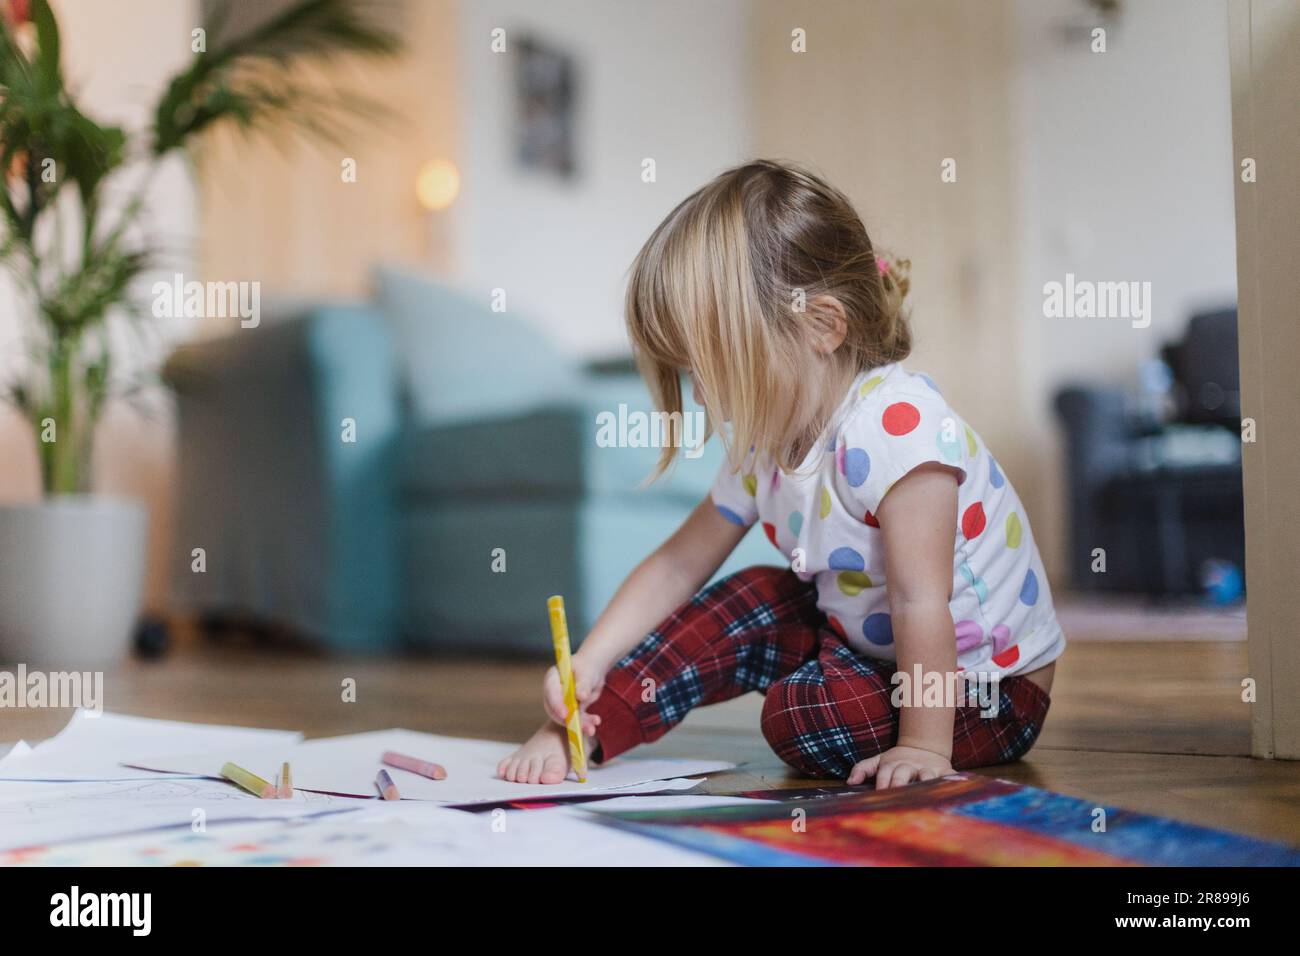 Cute little girl drawing with crayons, sitting on the floor at home. Stock Photo